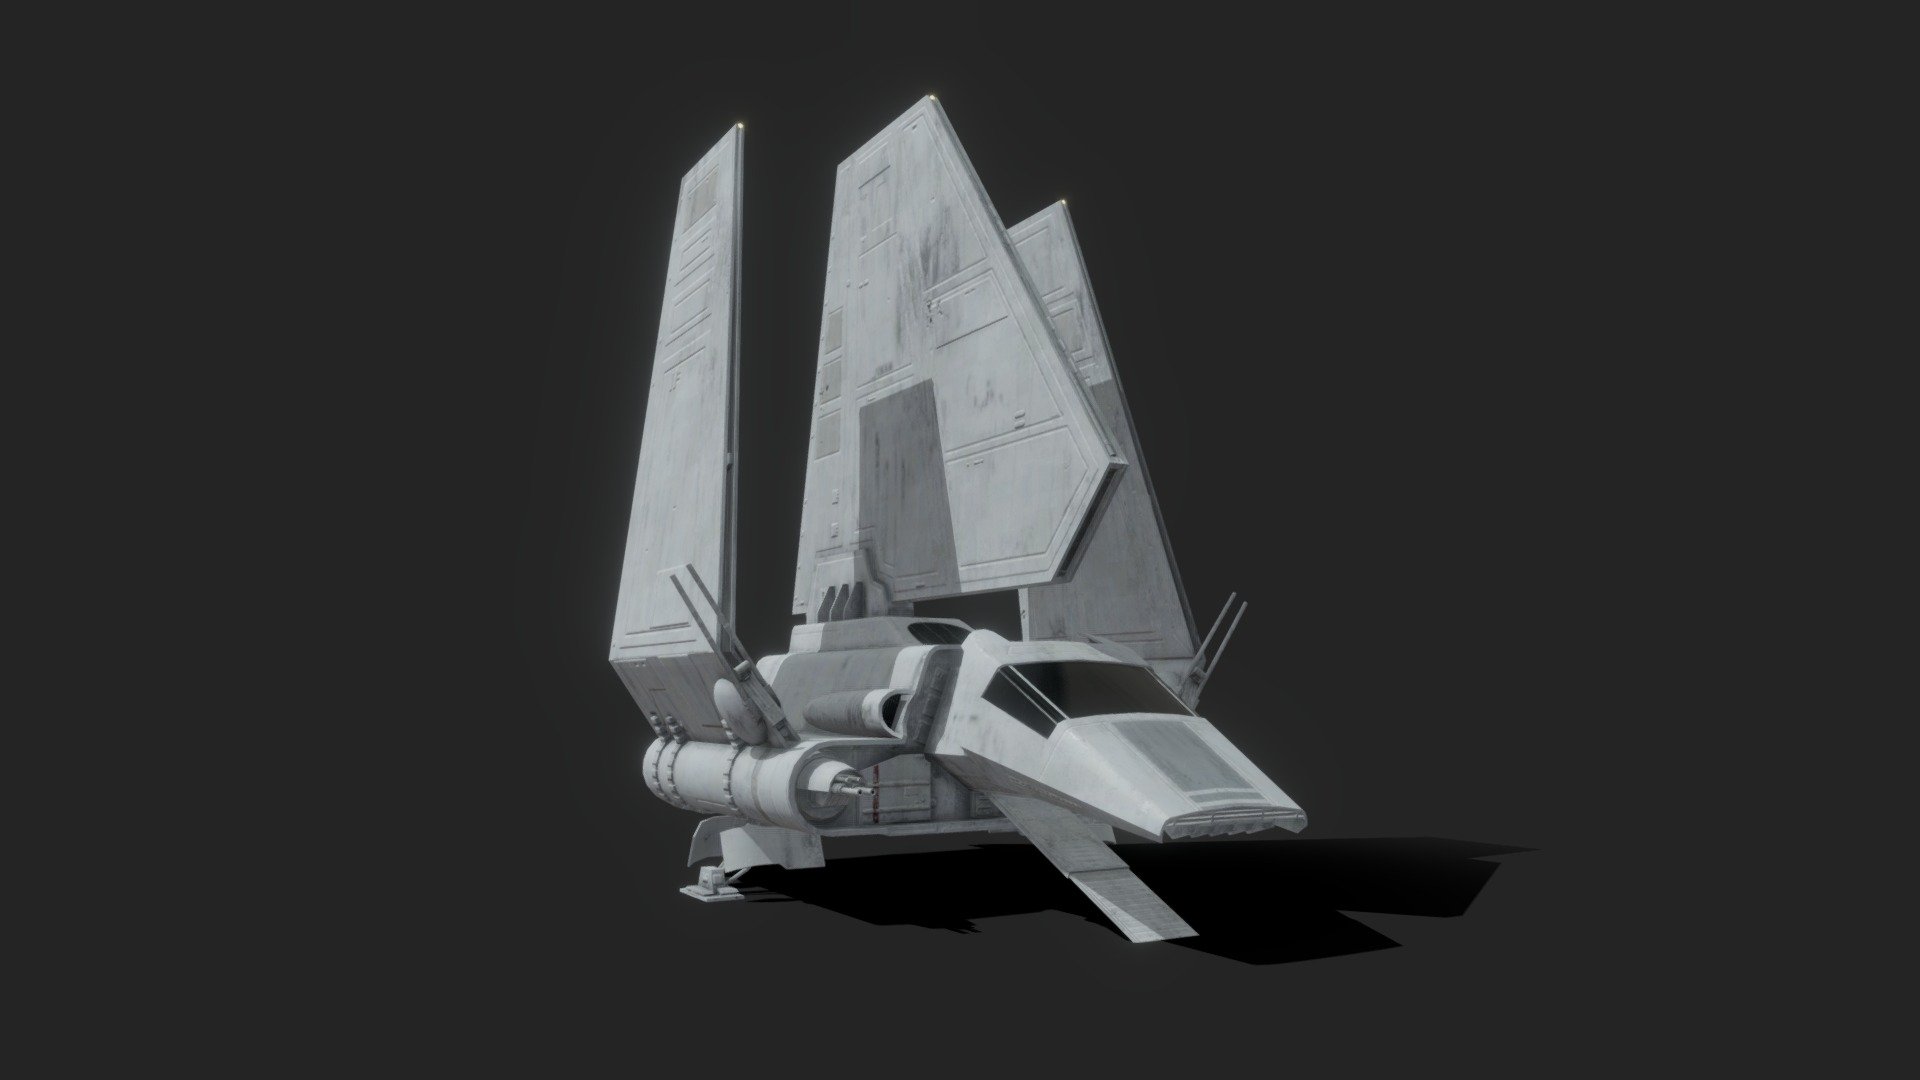 A low poly Lambda Shuttle, as seen in Star Wars Return of the Jedi, Empire Strikes Back (special edition), Rogue One, and The Mandalorian. A timeless design! Renders can be seen on my artstation.

This model is about 85% accurate, with fspy used on photos of the original miniature to double check the wing proportions, while the cockpit shape and angle is a cross between the miniature and the full-scale set. A few areas are slightly simplified to keep the poly count and complexity low (for example, the landing gear just clips into the body instead of having a modeled bay interior). Perfect for filling out a realtime imperial hangar bay. The model is not rigged but the moving parts are all separate objects with the correct pivots and parenting for easy rotating into flight mode 3d model